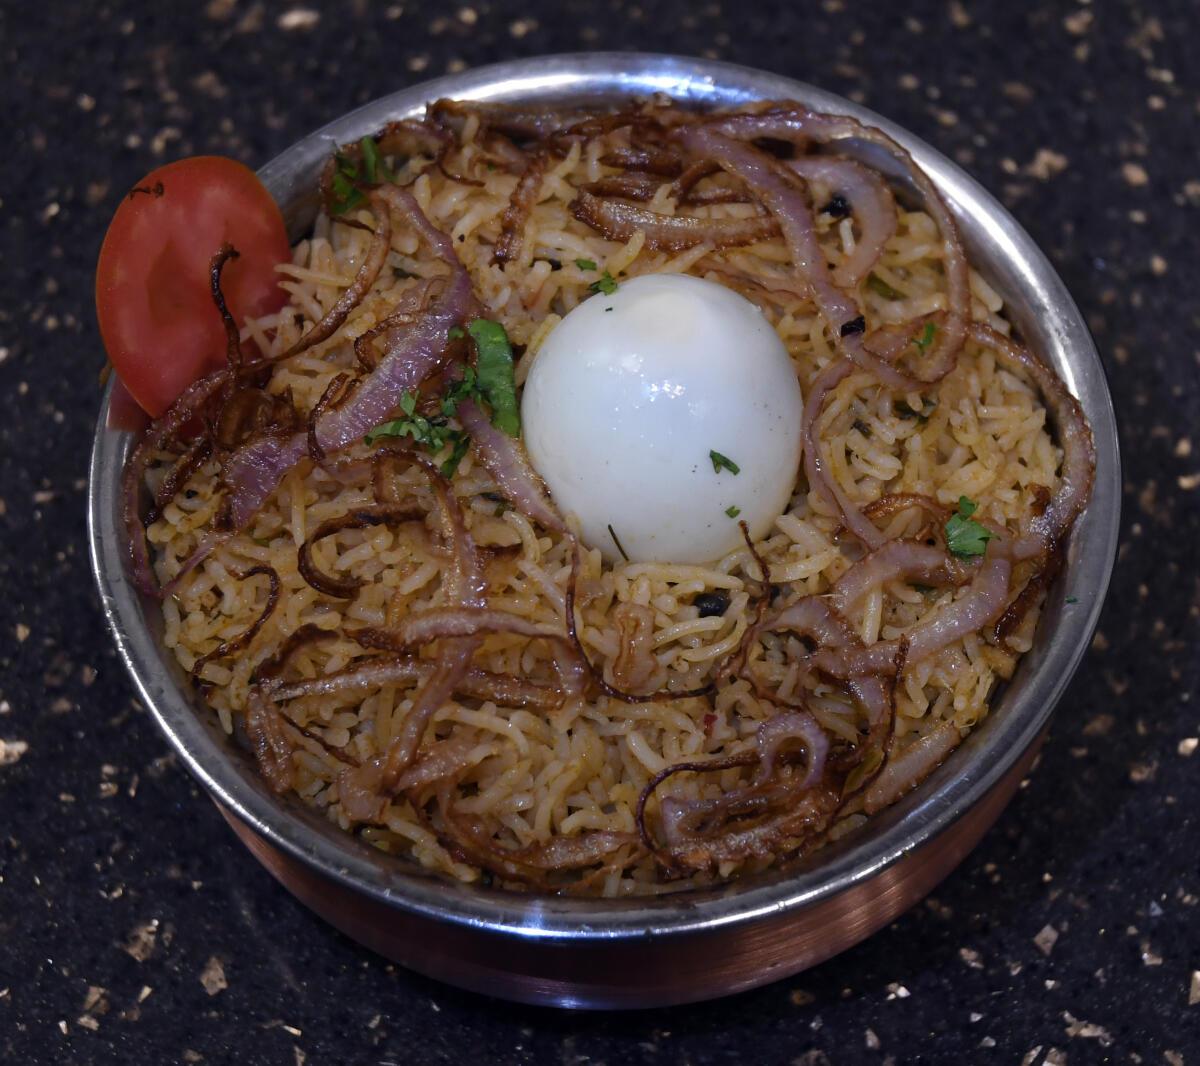 Mutton Biriyani is one of the most popular dishes from Cosmopolitan Club